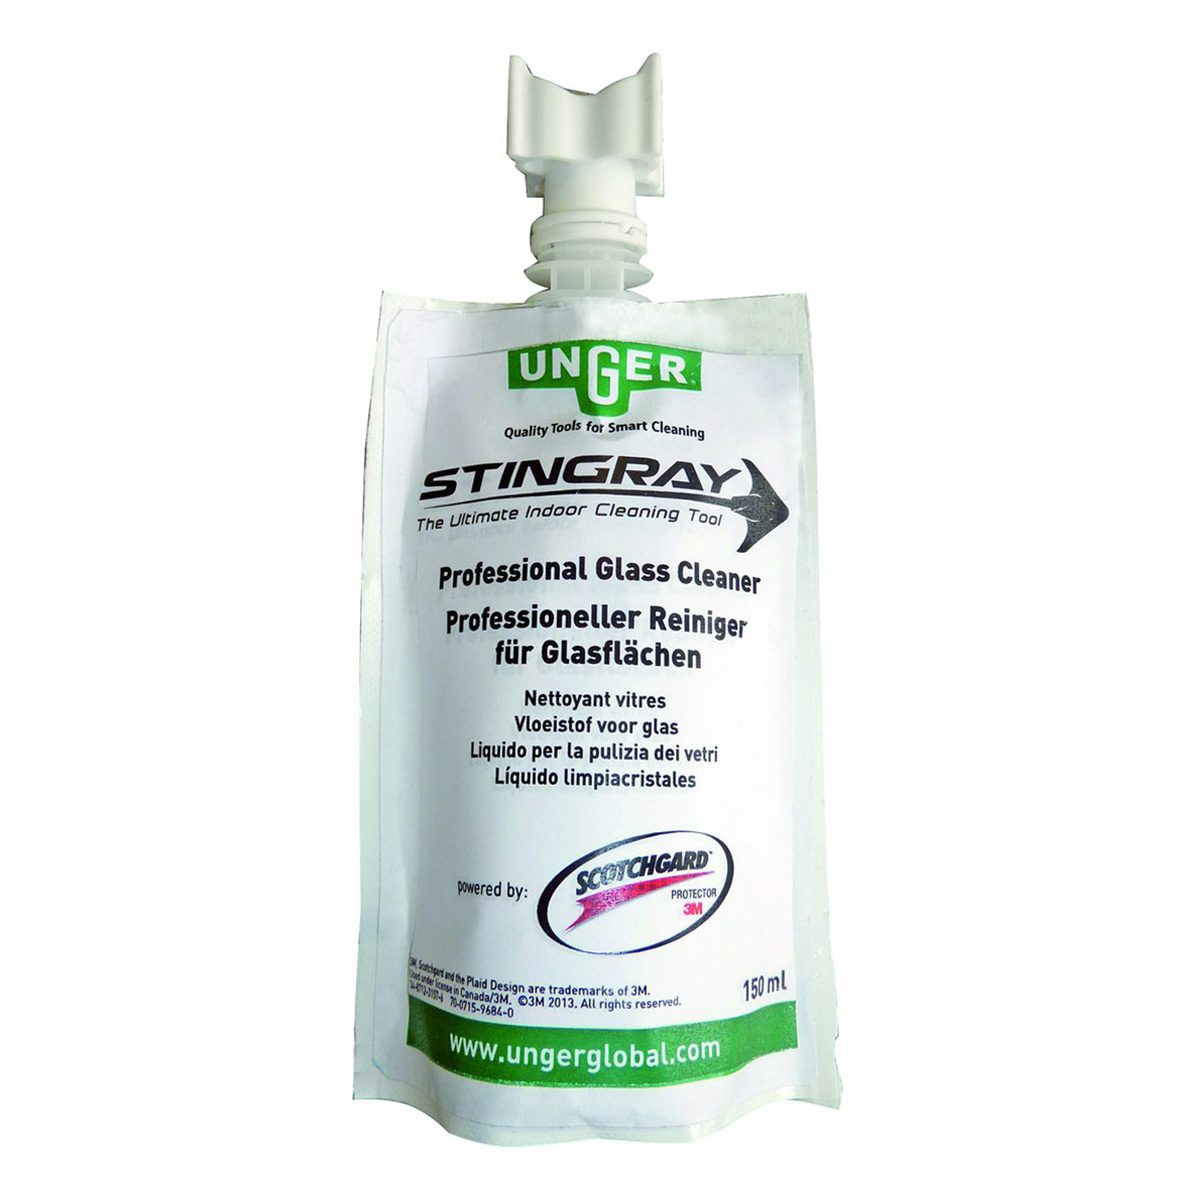 cleaning-equipment-squeegees-and-window-cleaning-unger-stingray-glass-cleaner-pouch-150ml-3m-scotchgard-easy-gliding-quick-drying-high-efficiency-vjs-distributors-UNSRGLAS